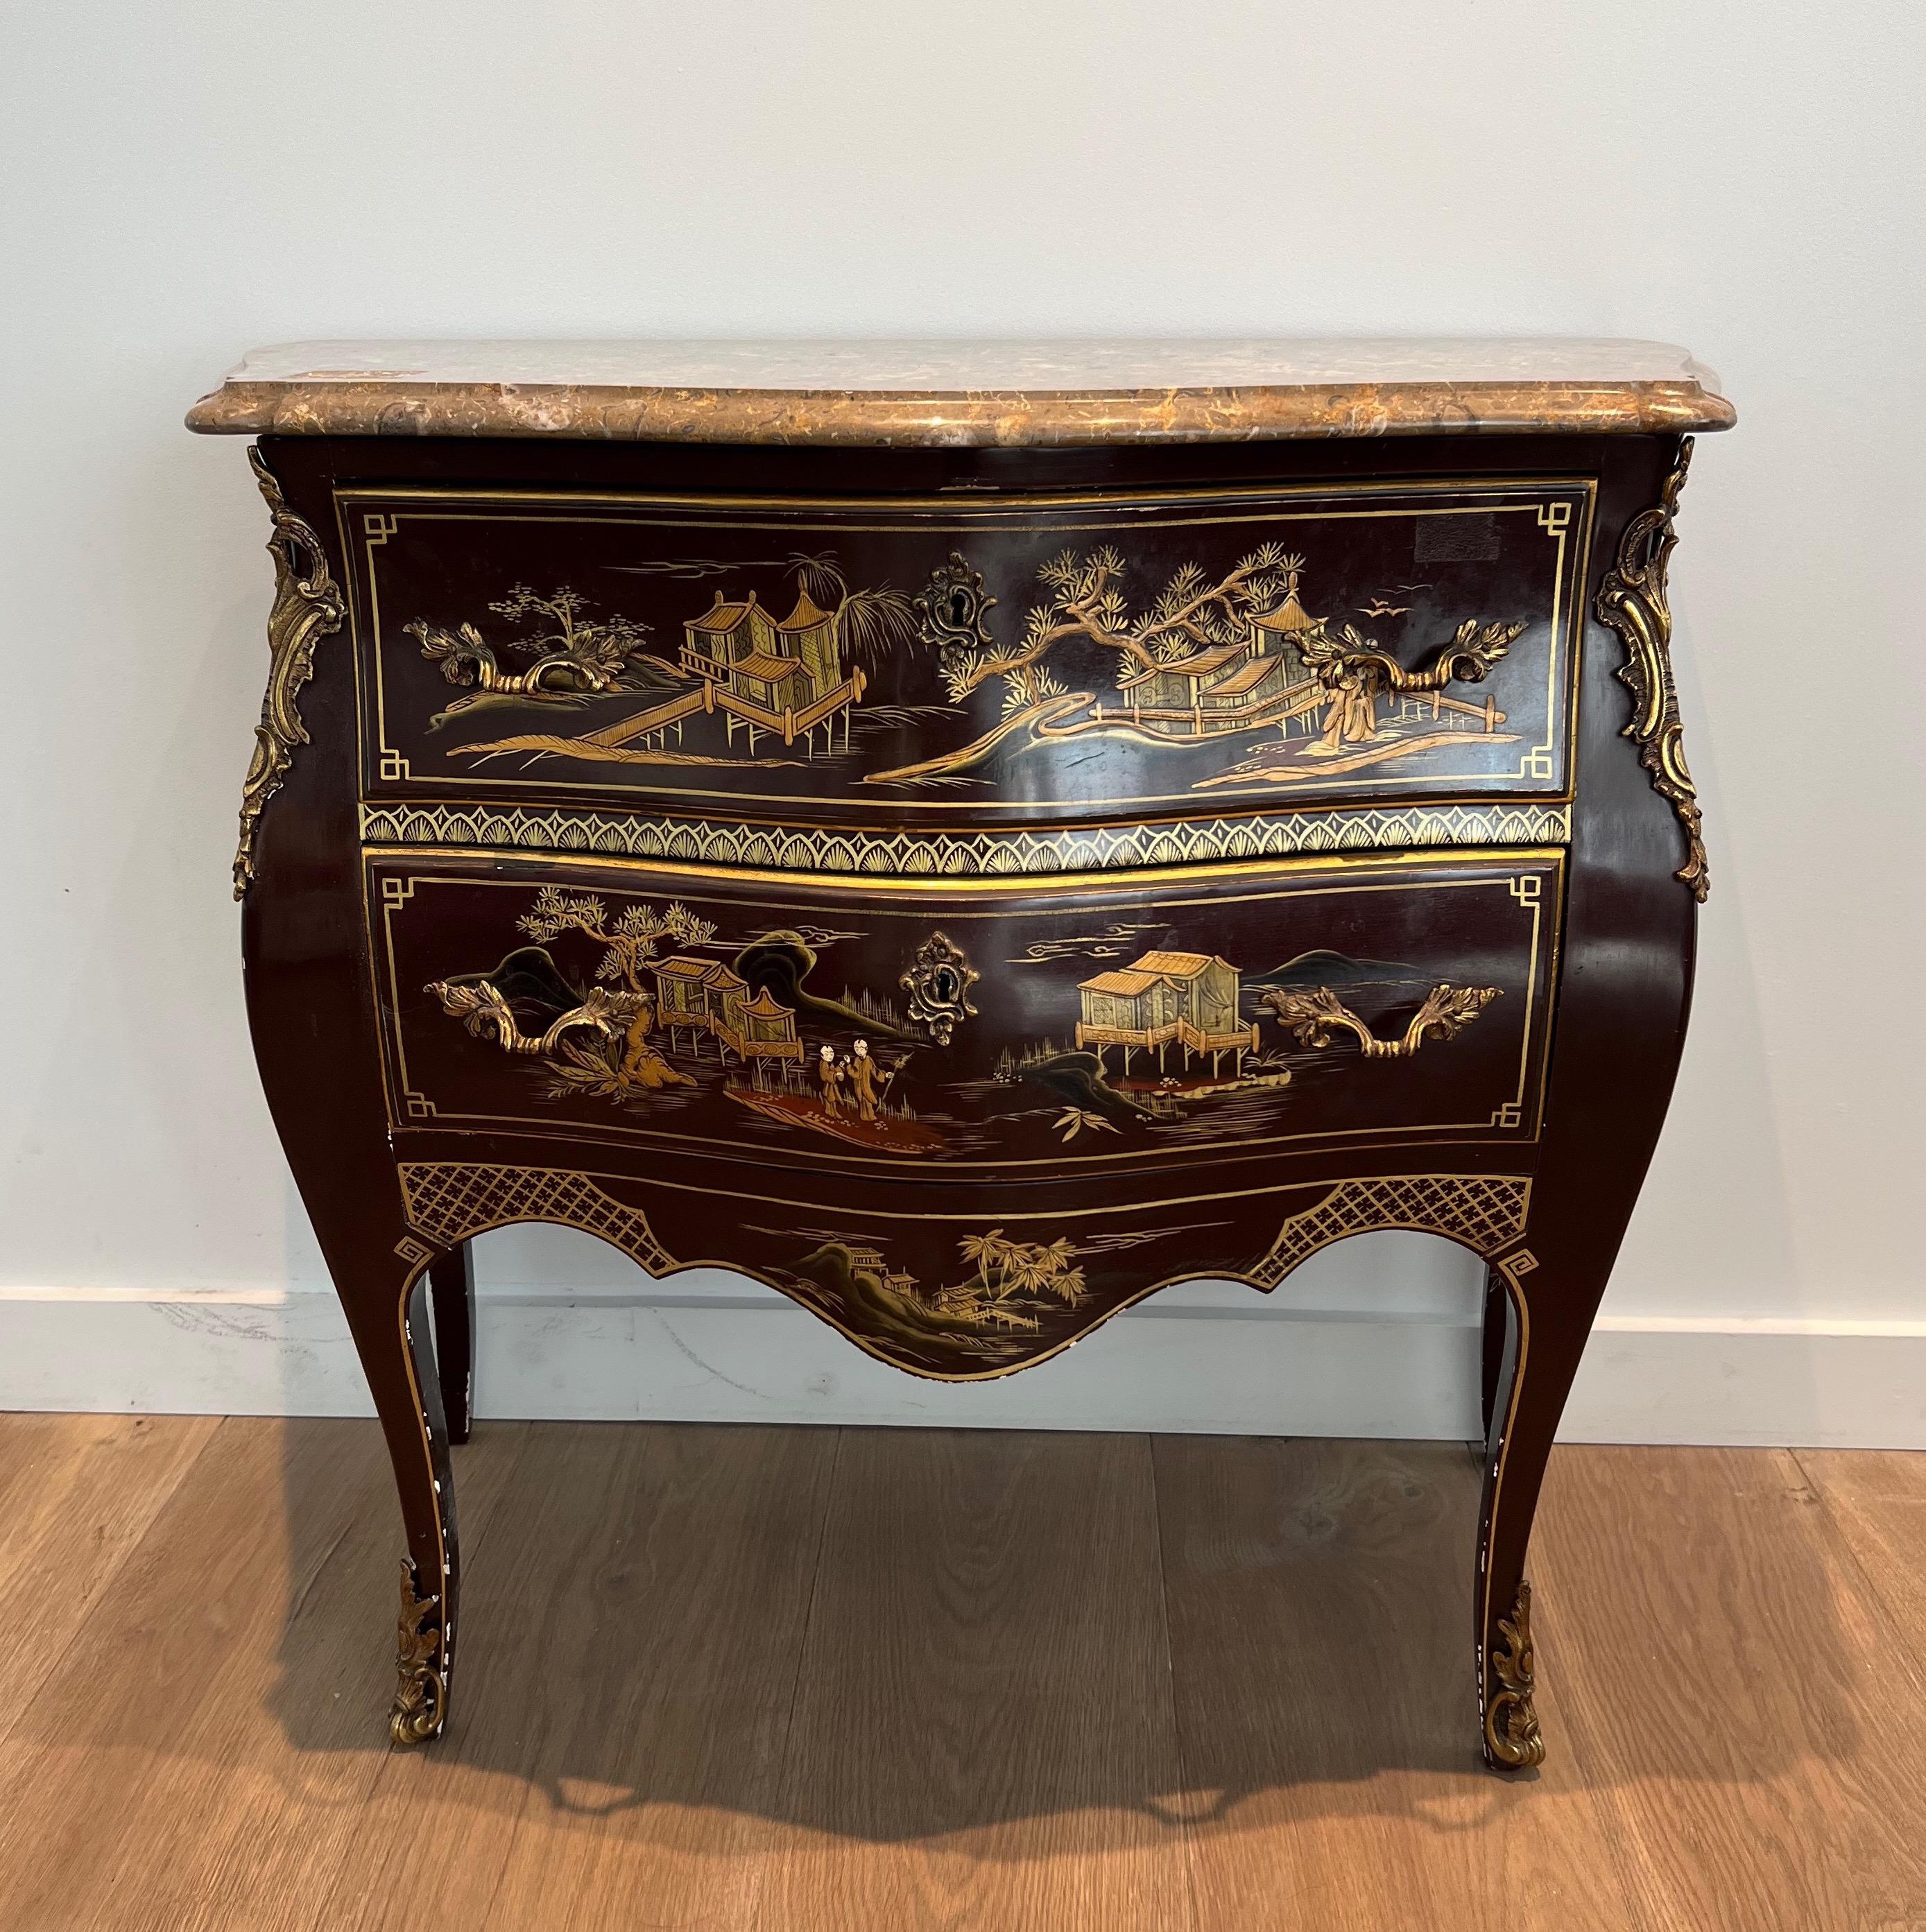 This very nice and decorative small commode is made of lacquered and gilt wood with chinese scenes. This very elegant chest of drawers is wonderfully decorated with bronze handles and feet. This is French work in the style of Maison Jansen. Circa